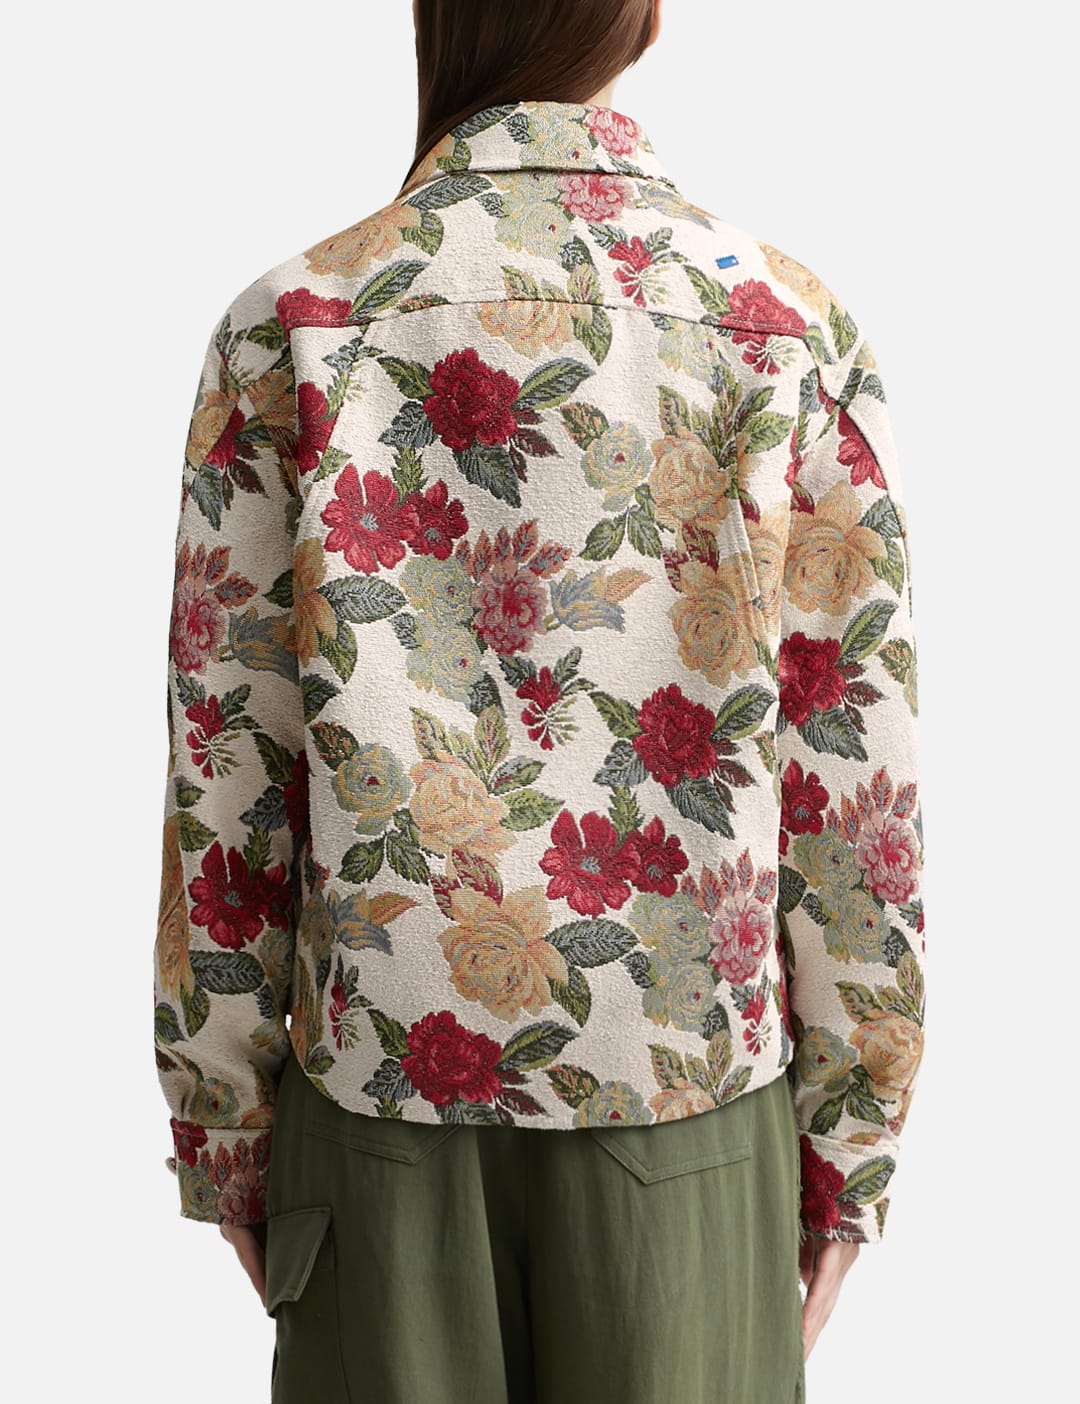 Ader Error - Floral Jacket | HBX - Globally Curated Fashion and